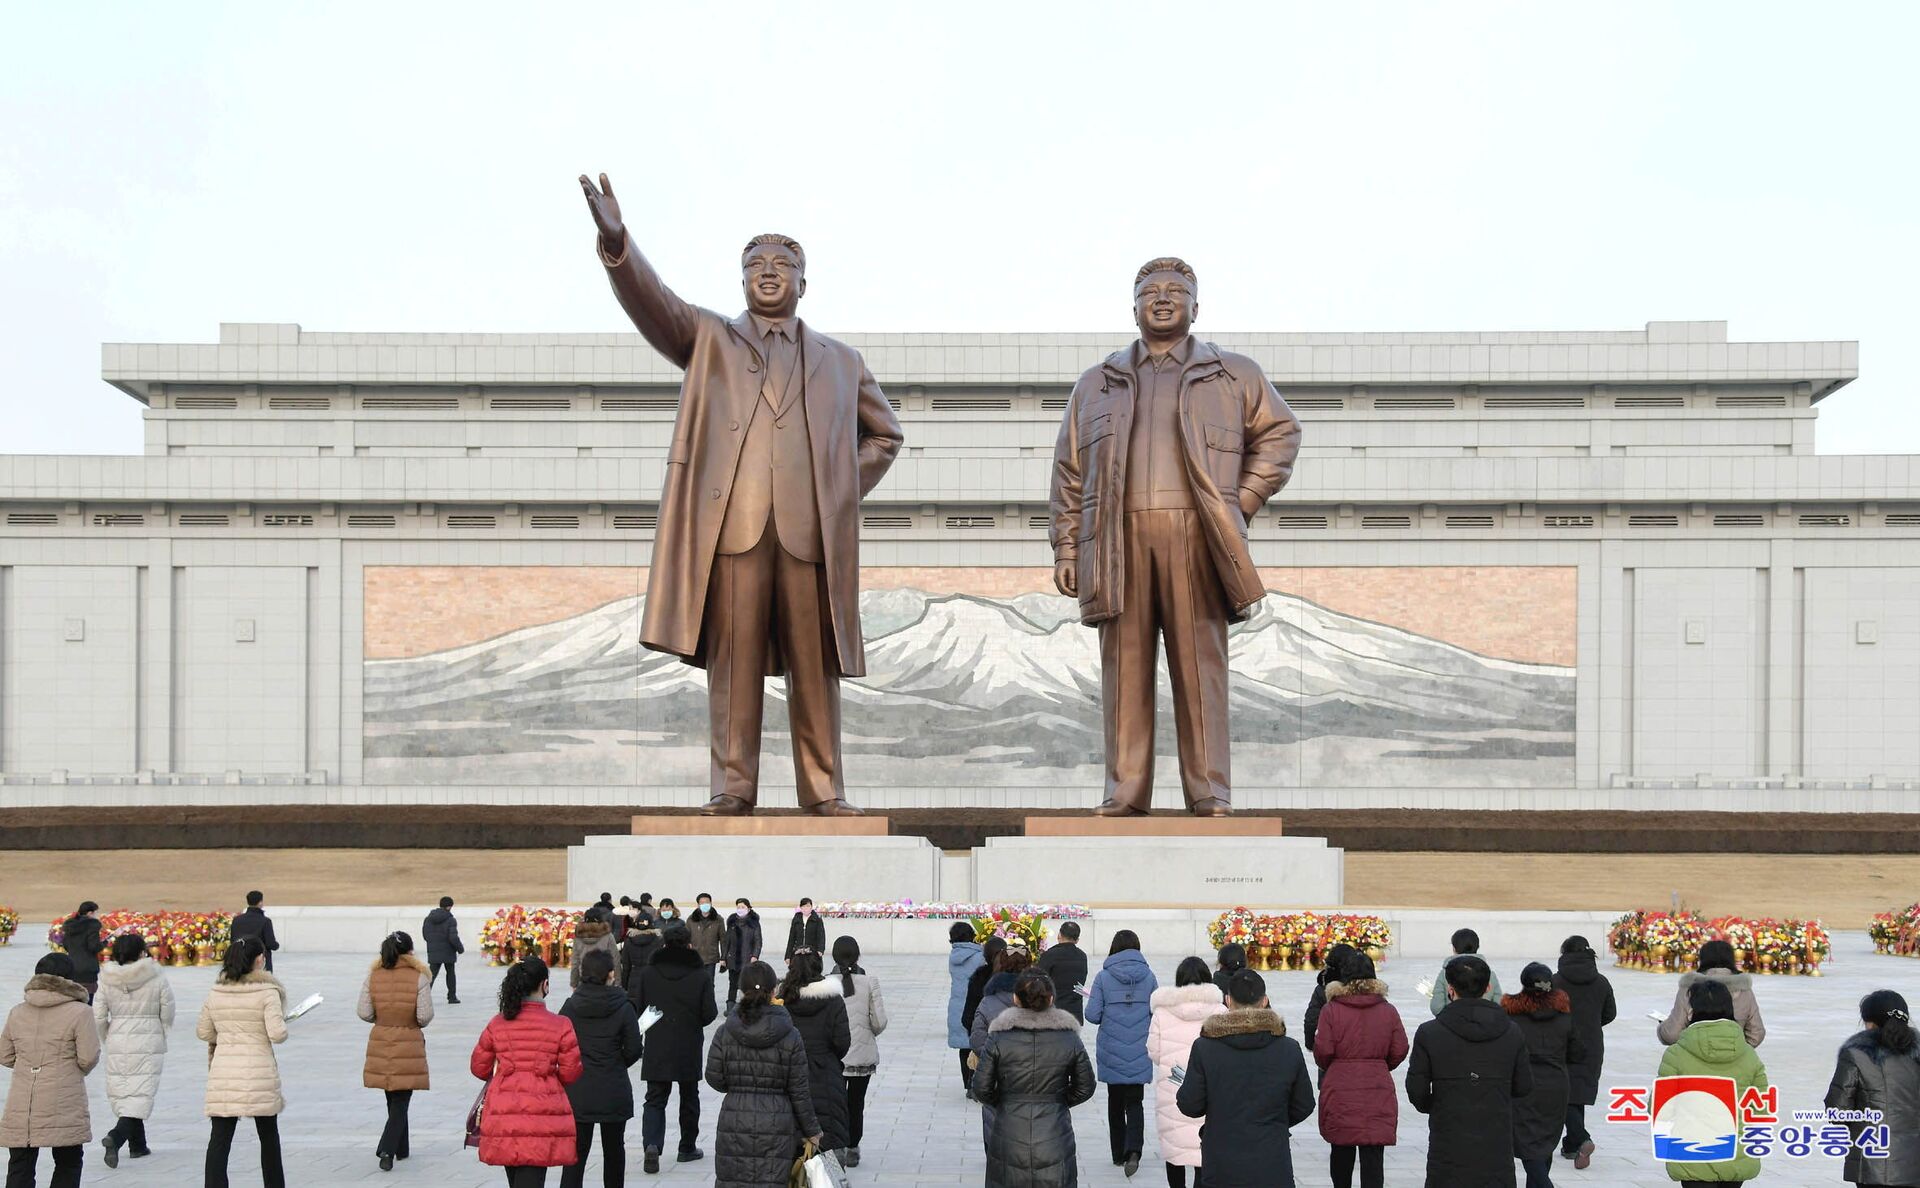 People lay floral tributes in front of the bronze statues of the late leaders Kim Il Sung and his son Kim Jong Il to commemorate the Day of the Shining Star, the birth anniversary of Kim Jong Il, at the Mansudae Grand Monument in Pyongyang, North Korea in this undated photo released by North Korea's Korean Central News Agency (KCNA) on February 17, 2021. - Sputnik International, 1920, 07.09.2021